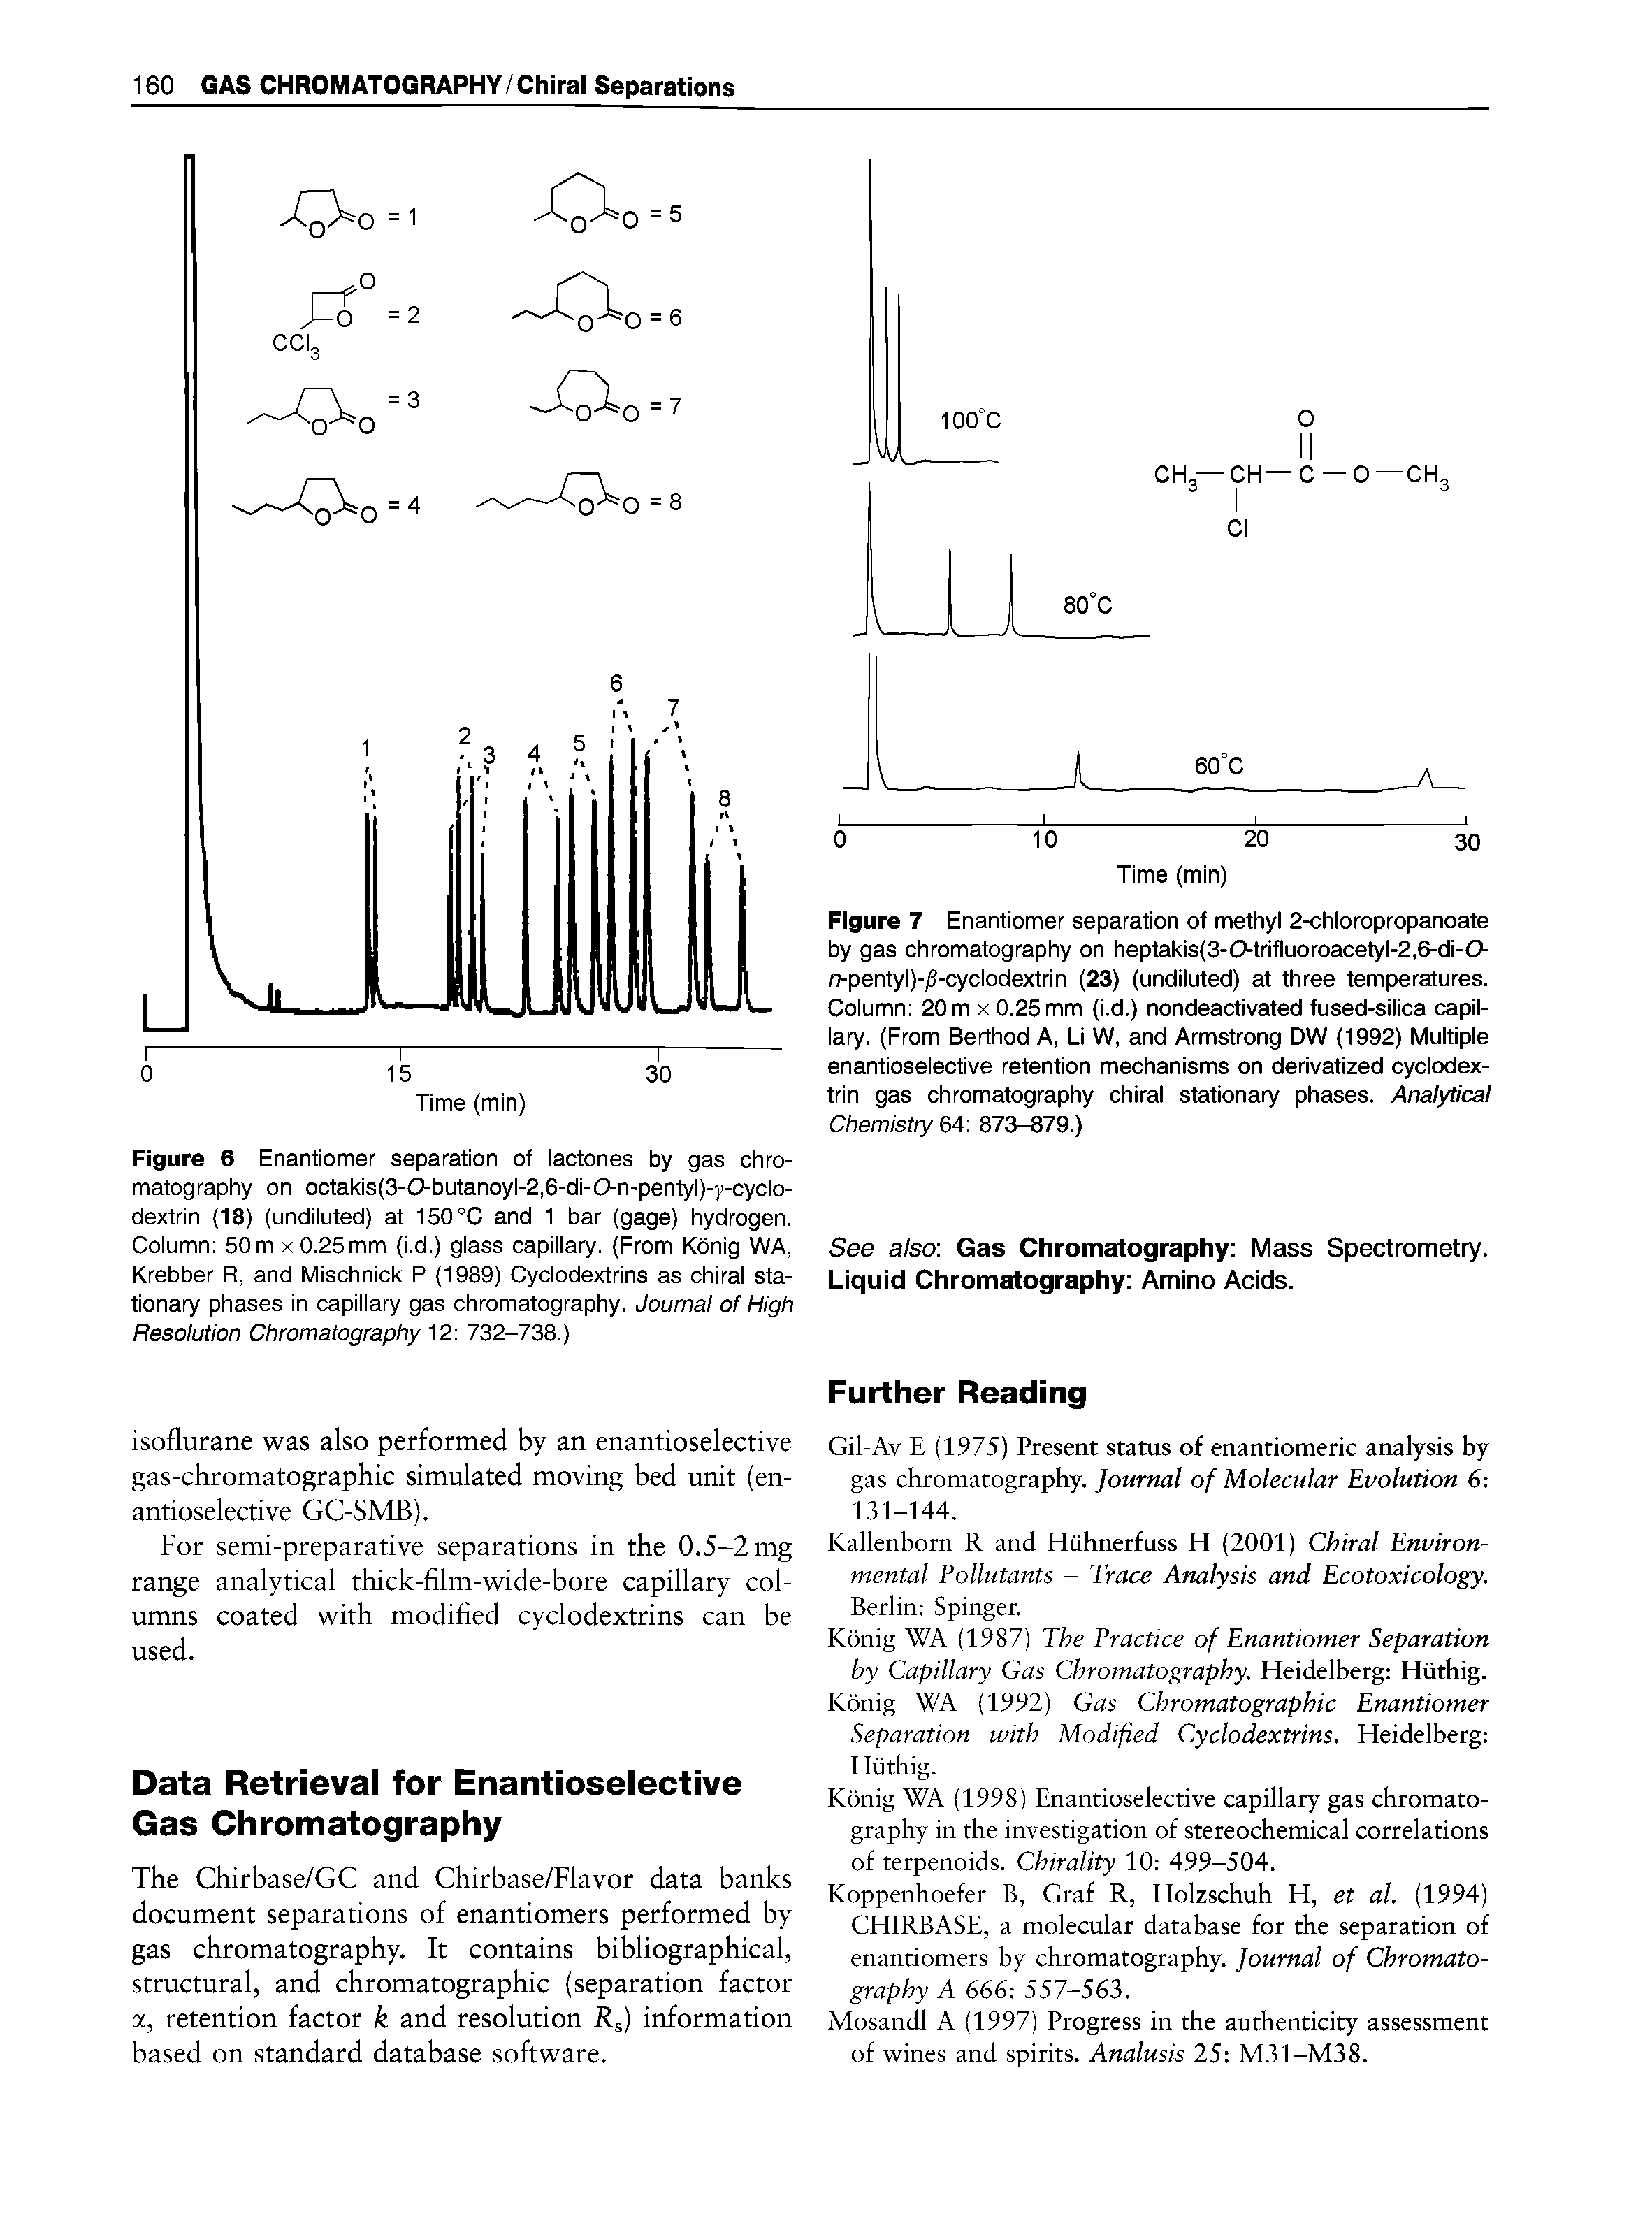 Figure 7 Enantiomer separation of methyl 2-chloropropanoate by gas chromatography on heptakis(3-0-trifluoroacetyl-2,6-di-0-/>pentyl)-)5-cyclodextrin (23) (undiluted) at three temperatures. Column 20 m x 0.25 mm (i.d.) nondeactivated fused-silica capillary. (From Berthod A, Li W, and Armstrong DW (1992) Multiple enantioselective retention mechanisms on derivatized cyclodextrin gas chromatography chiral stationary phases. Analytical Chemistry 64 873-879.)...